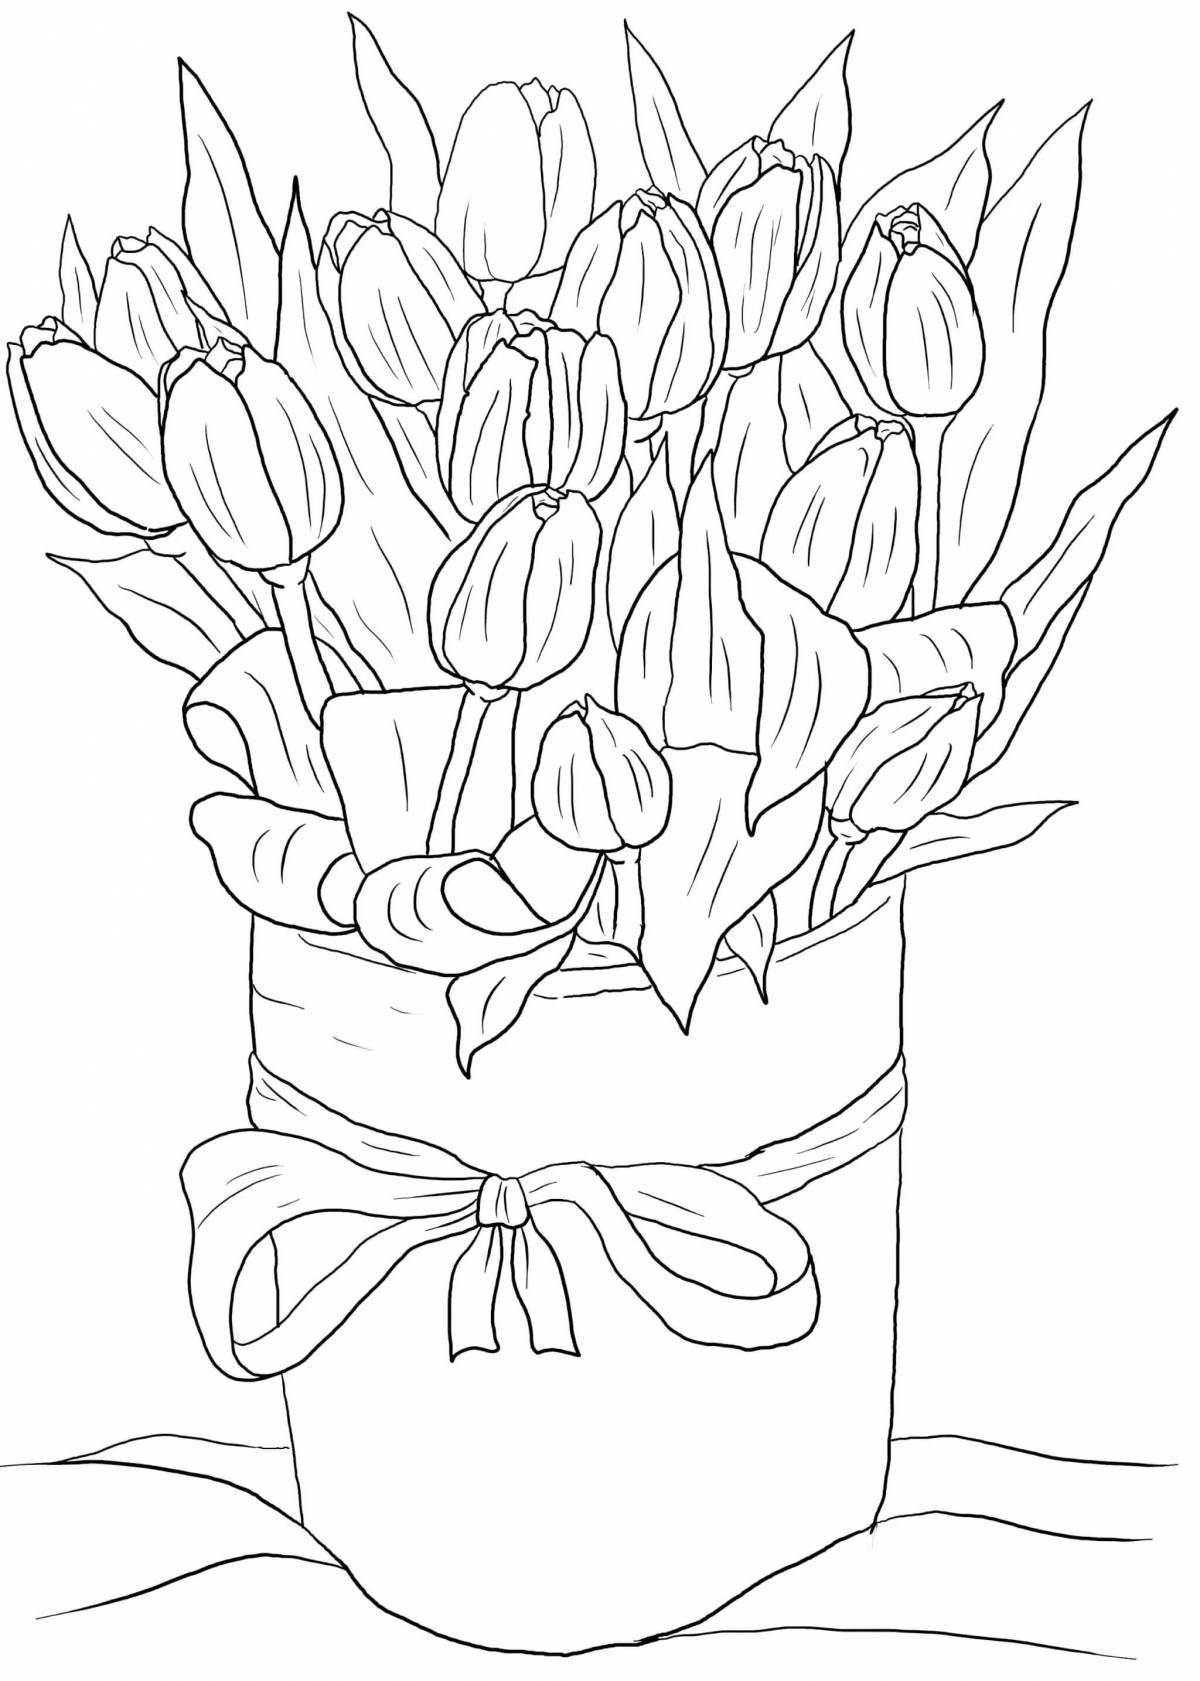 Coloring page lush bouquet of tulips